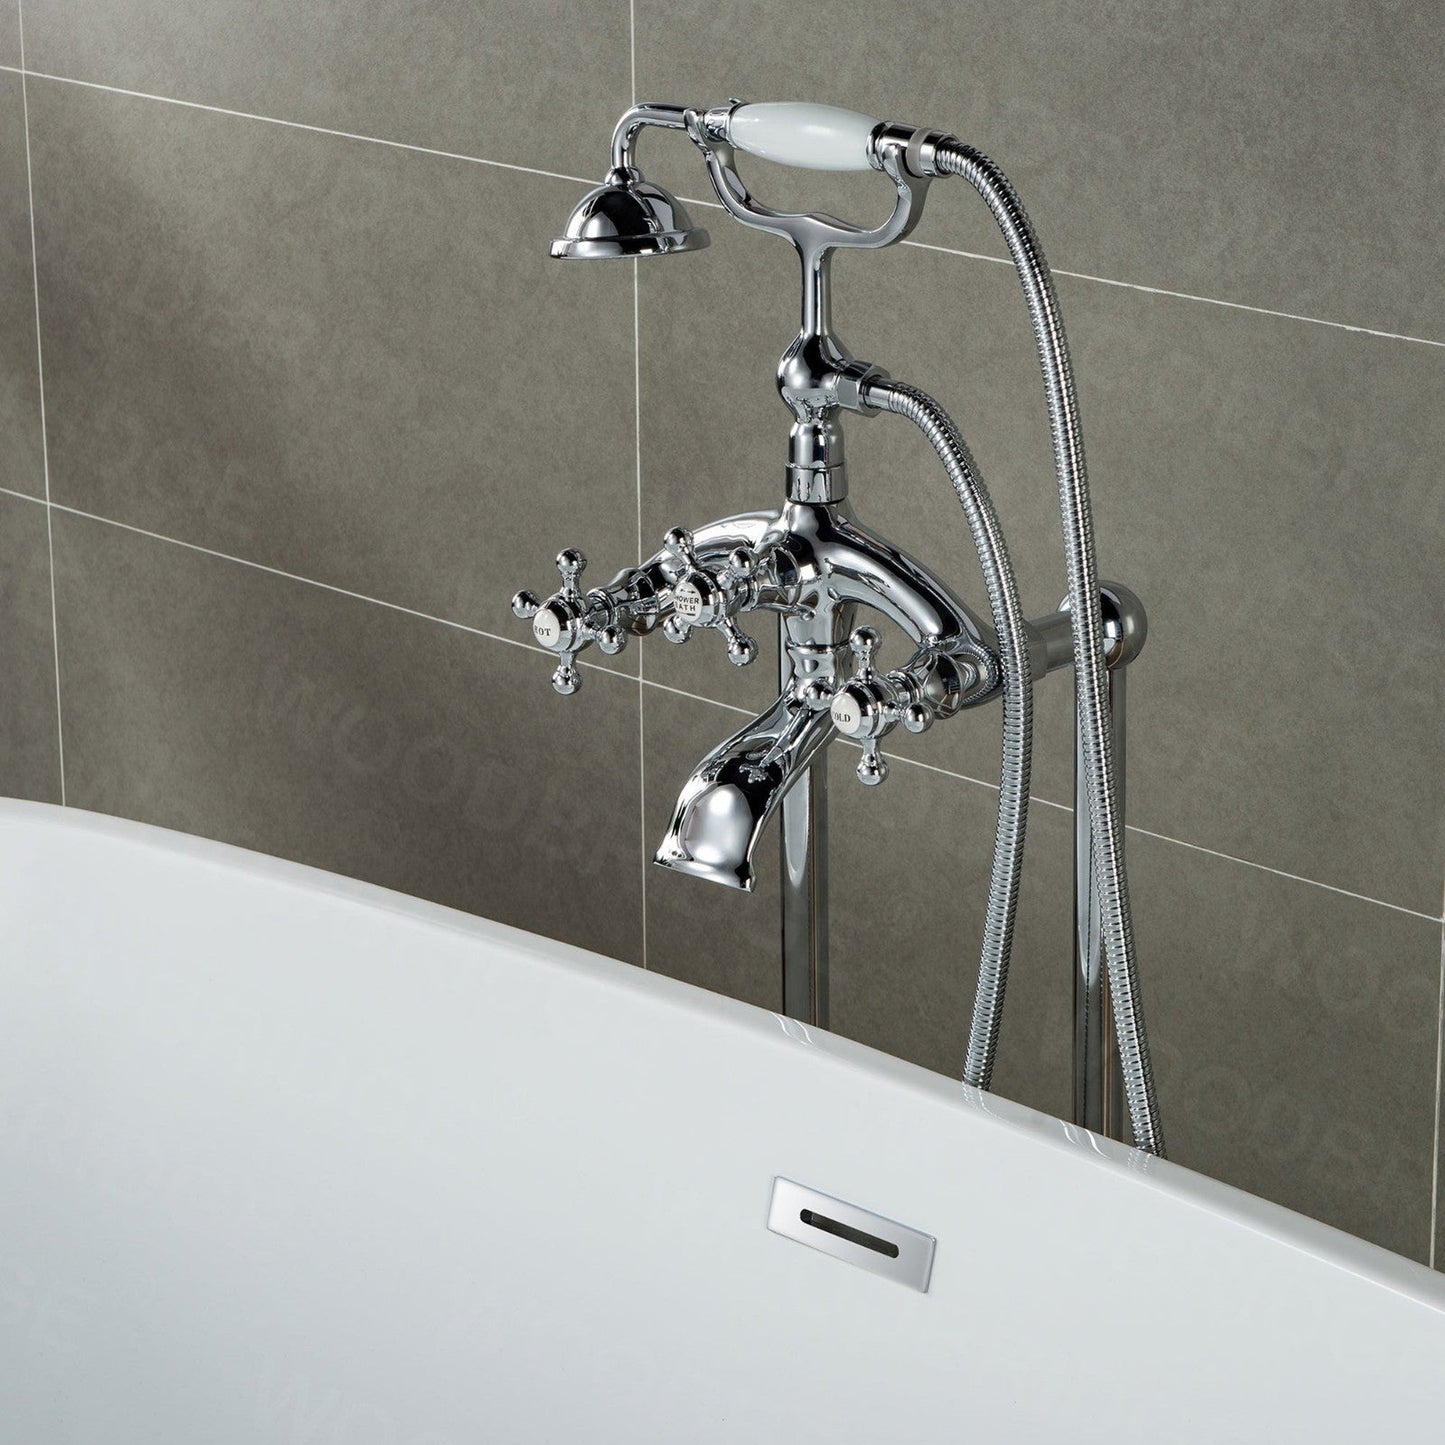 WoodBridge F0017CH Chrome Freestanding Clawfoot Tub Filler Faucet With Hand Shower and Hose